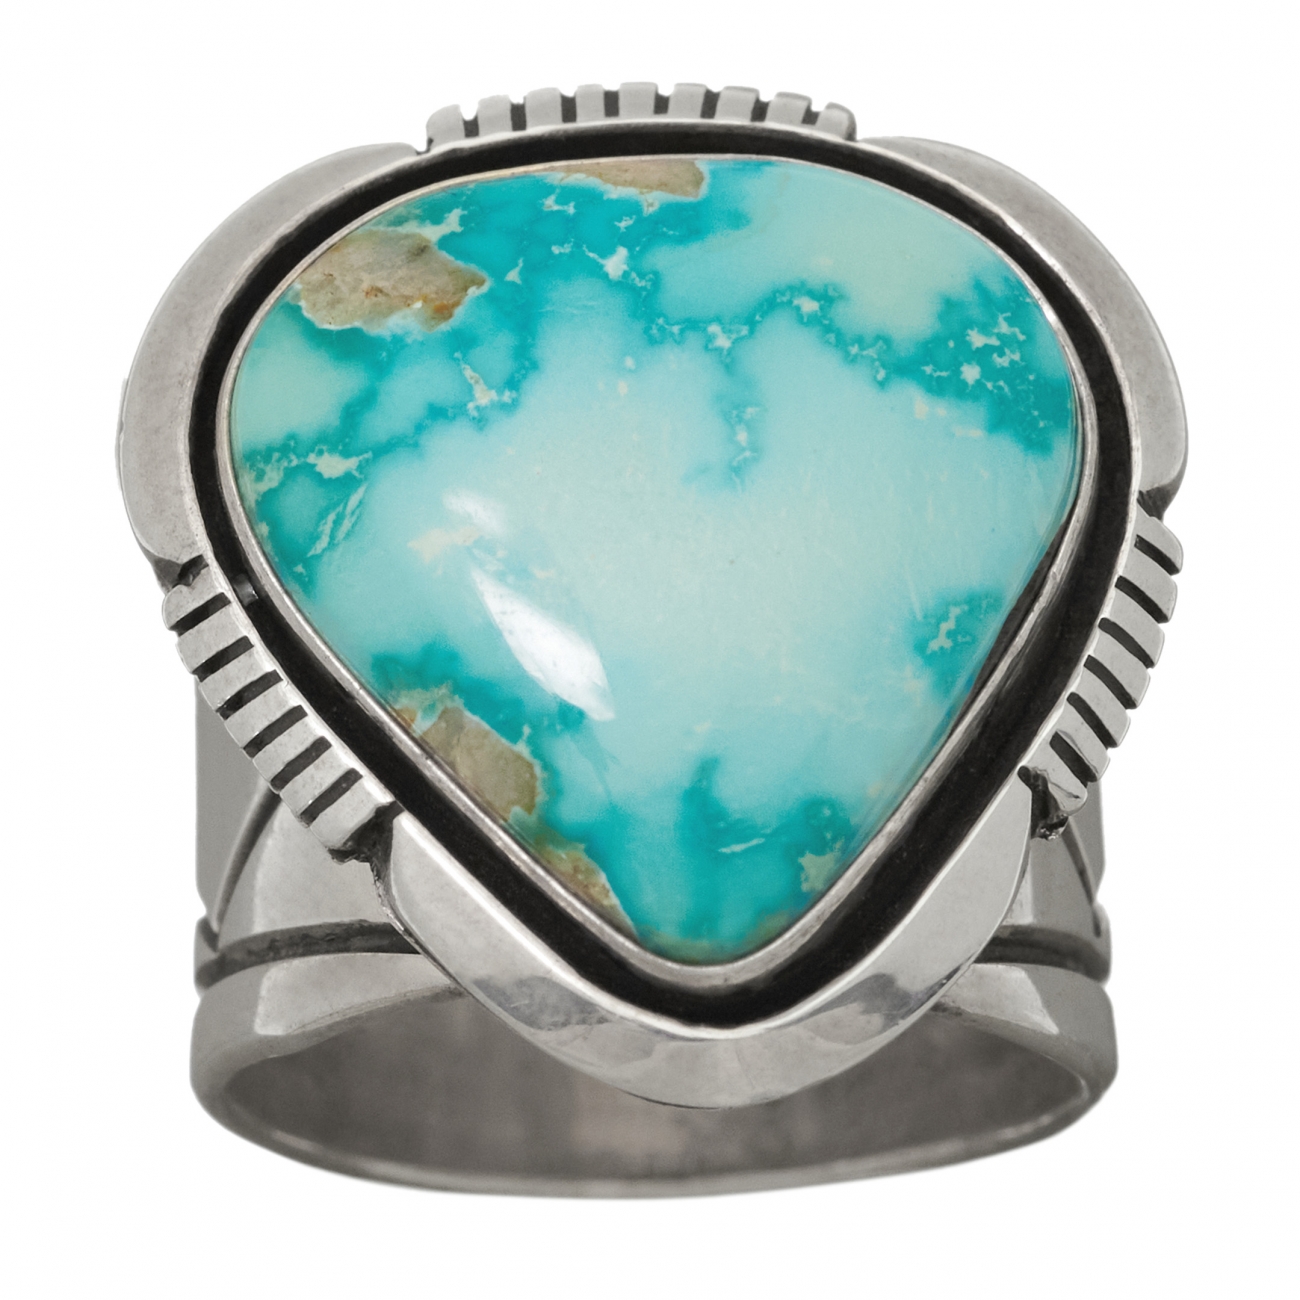 Navajo ring for men BA1097 in turquoise and silver - Harpo Paris